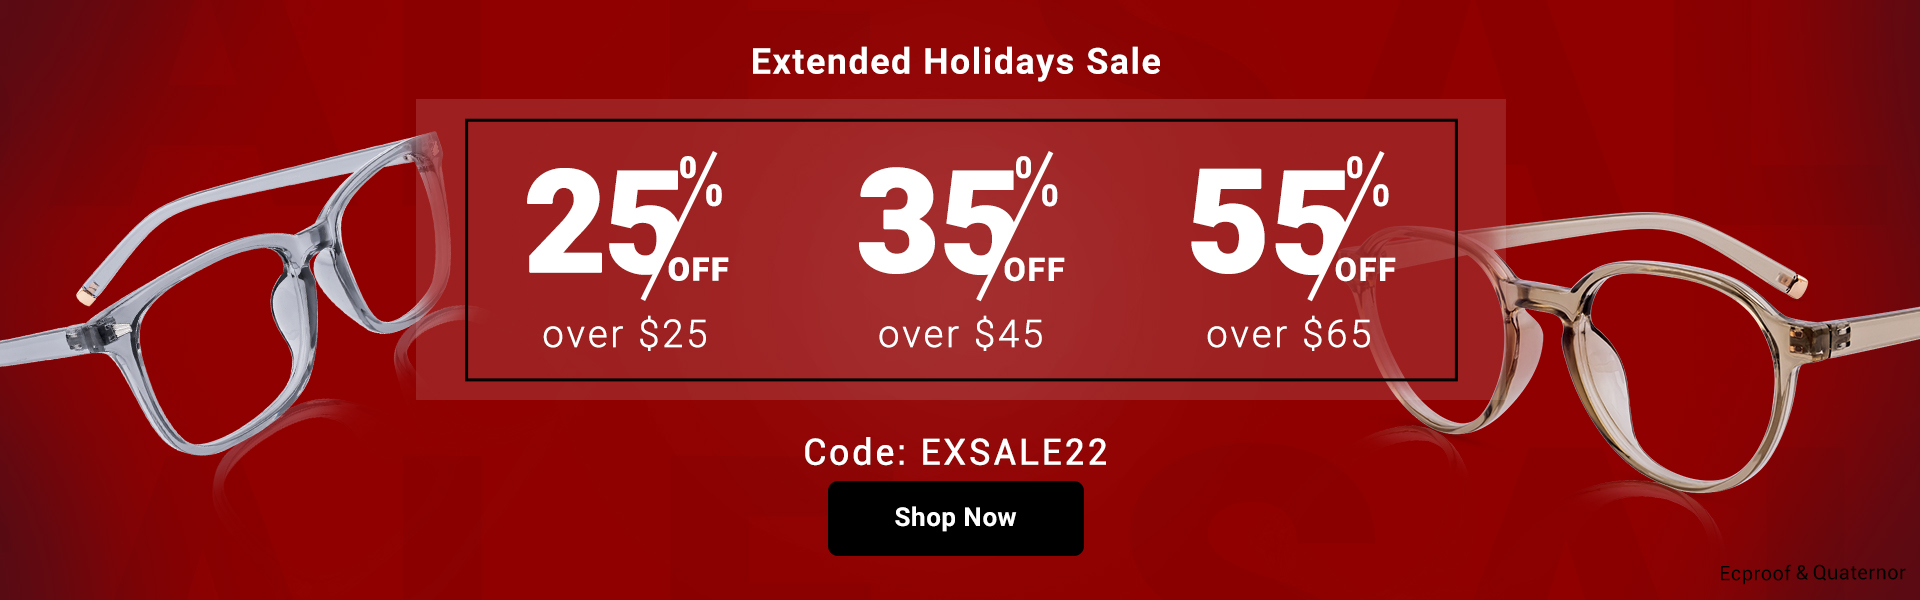 extended holidays sale